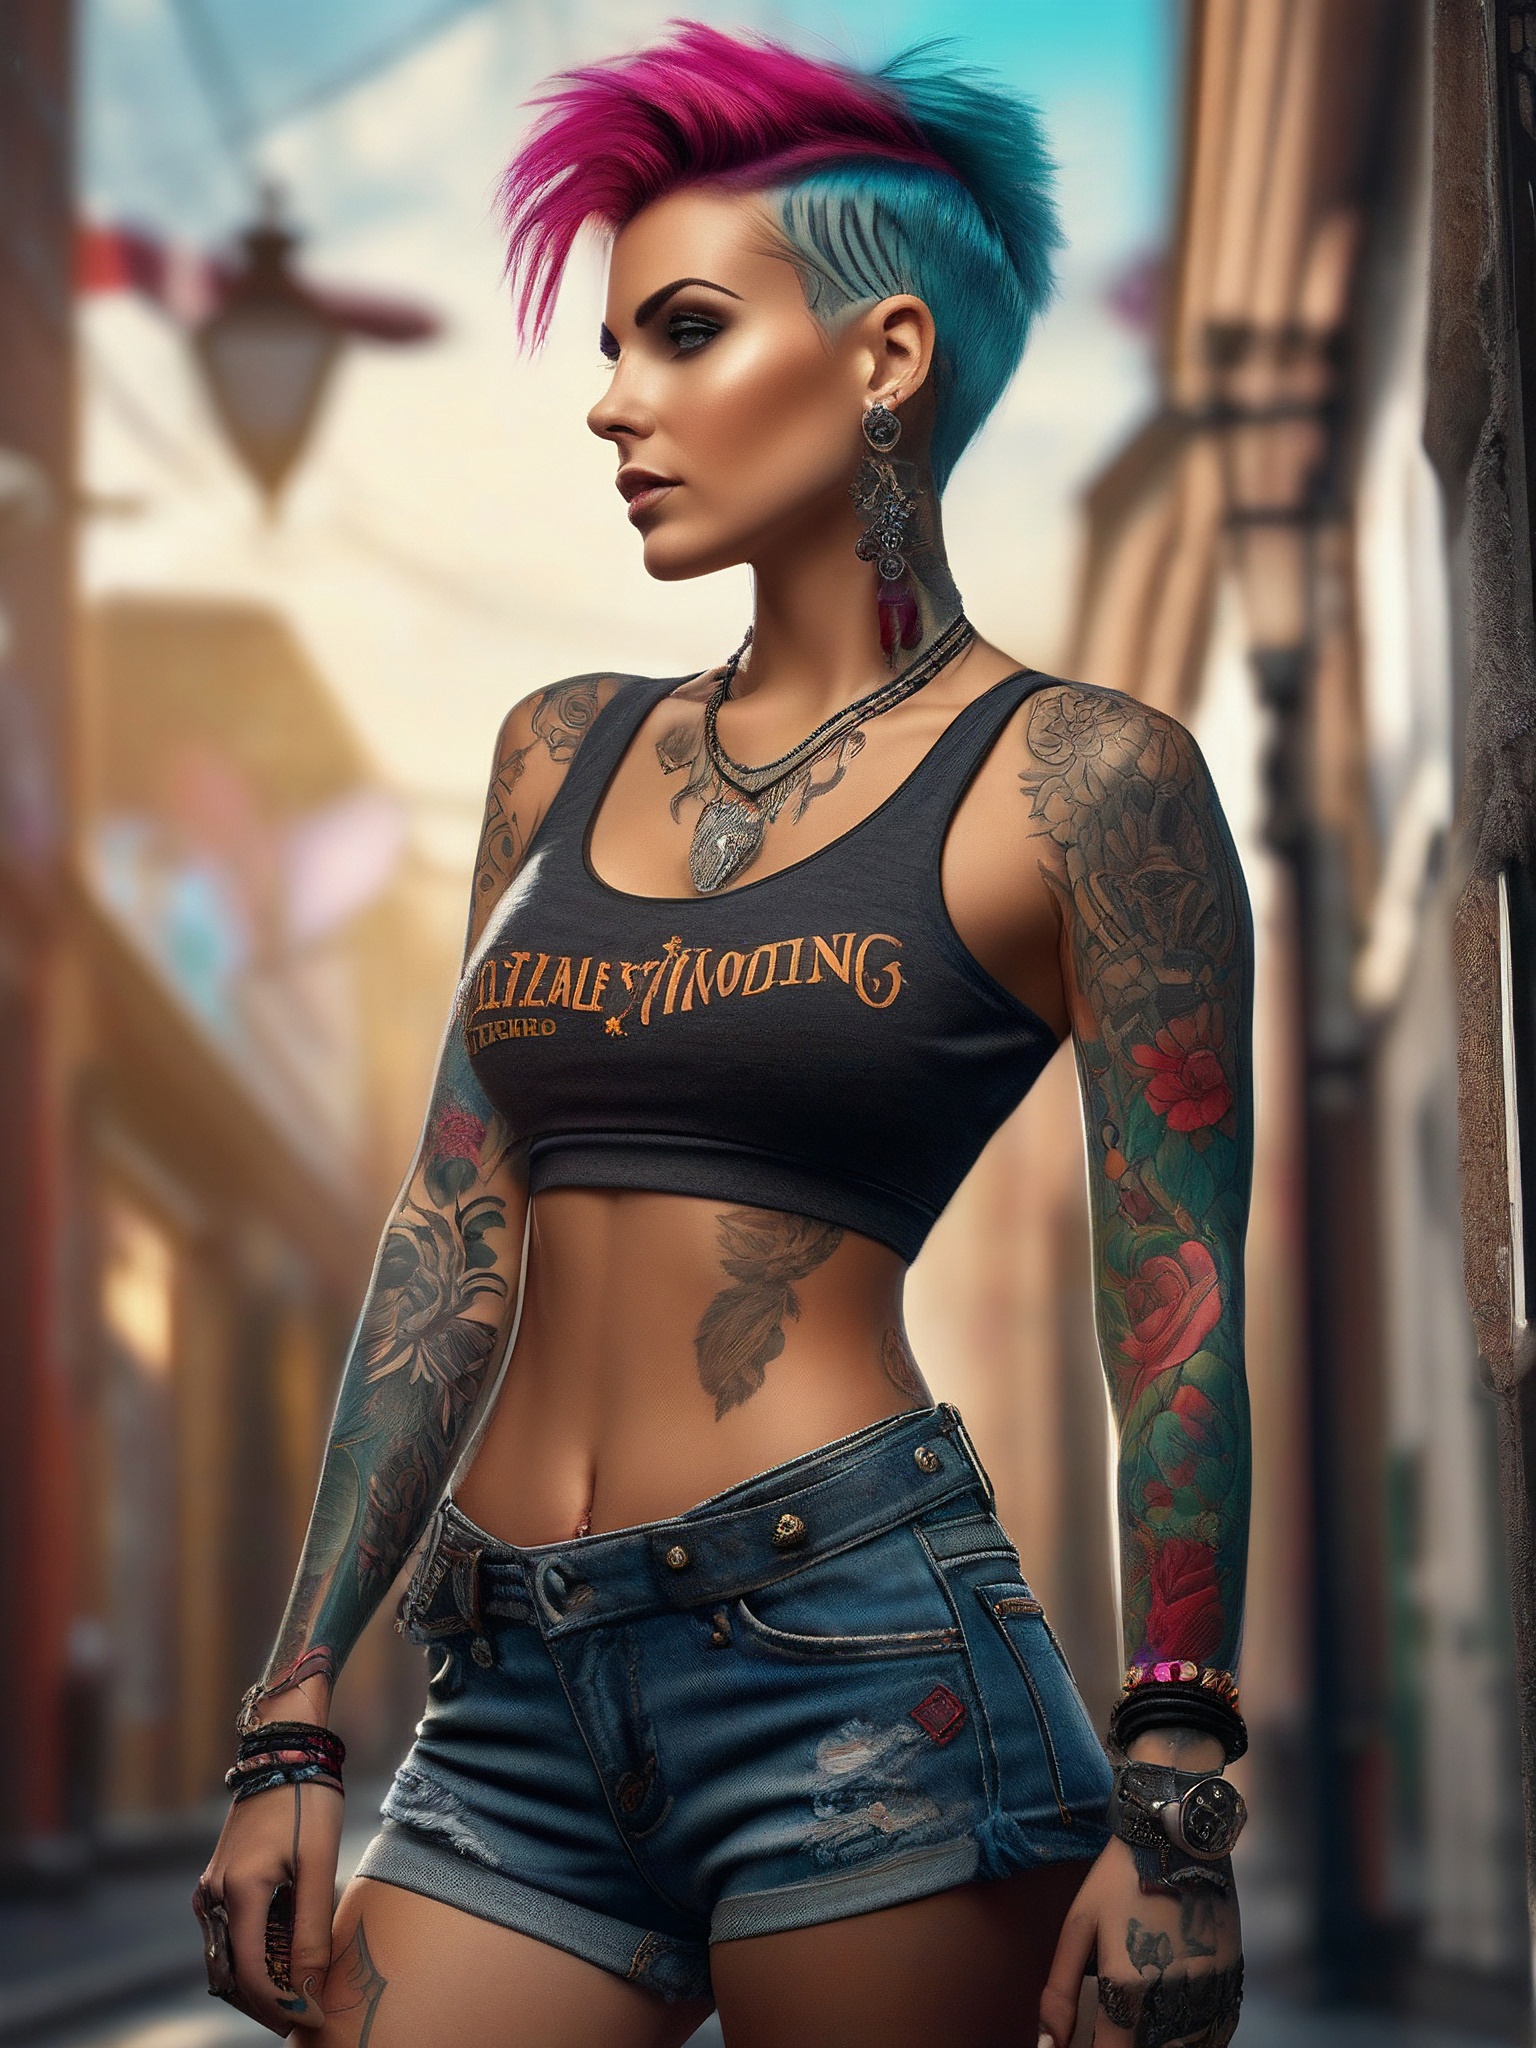 General 1536x2048 Alexey Sominsky AI art women dyed hair tank top depth of field multi-colored hair punk portrait display digital art shorts belly earring mohawk looking away blurred blurry background bracelets standing sunlight parted lips